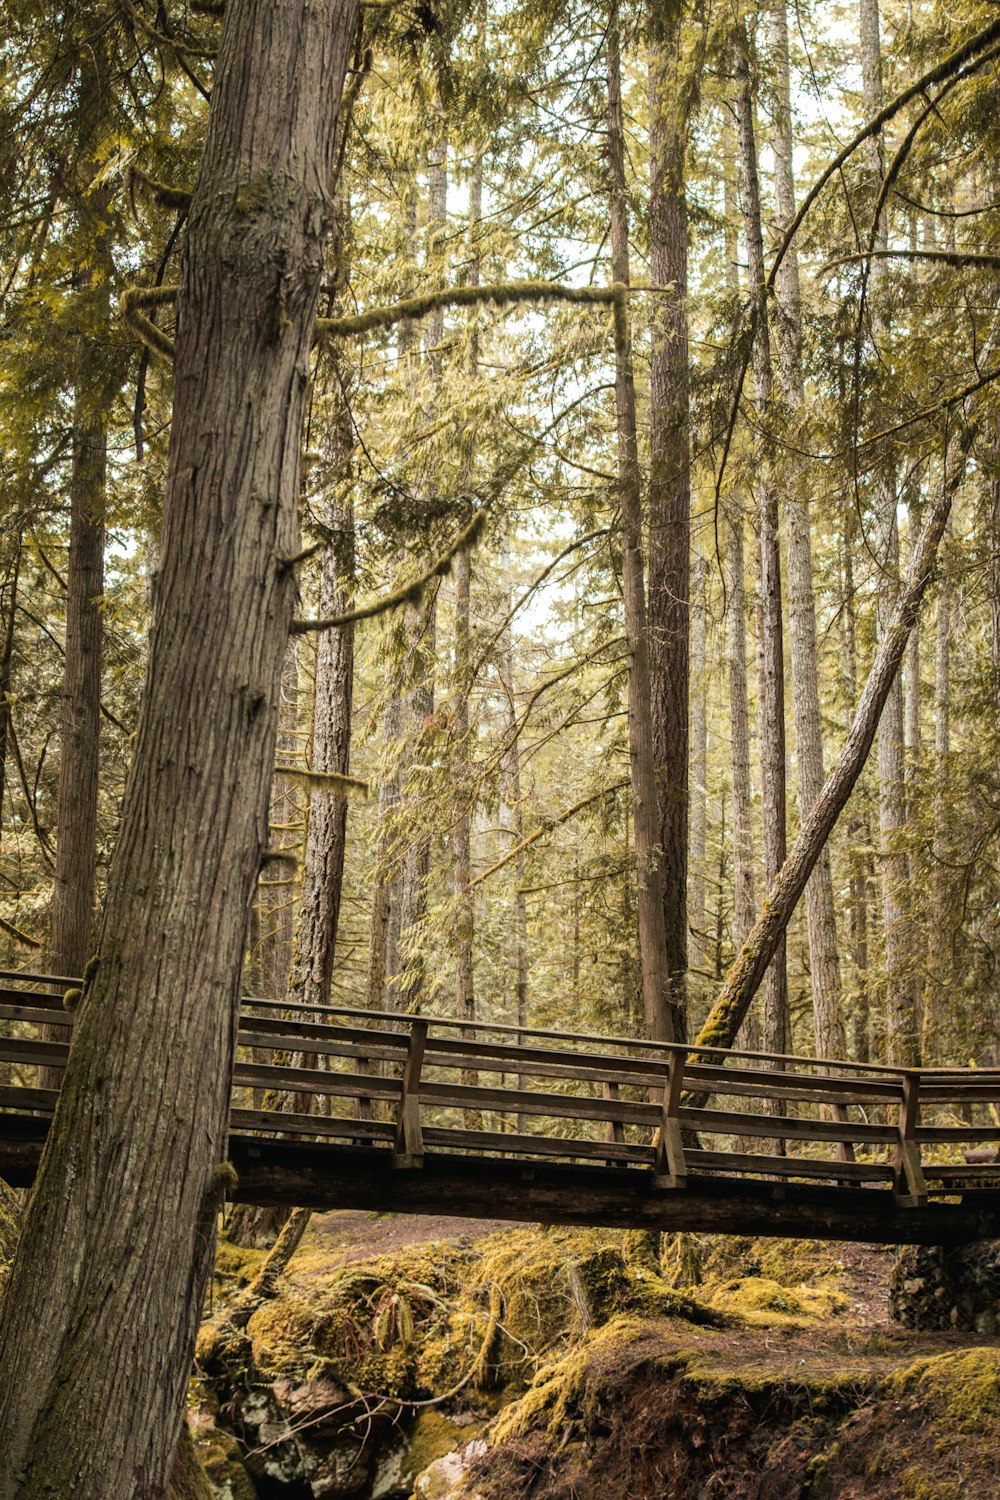 a wooden bridge over a stream in a forest